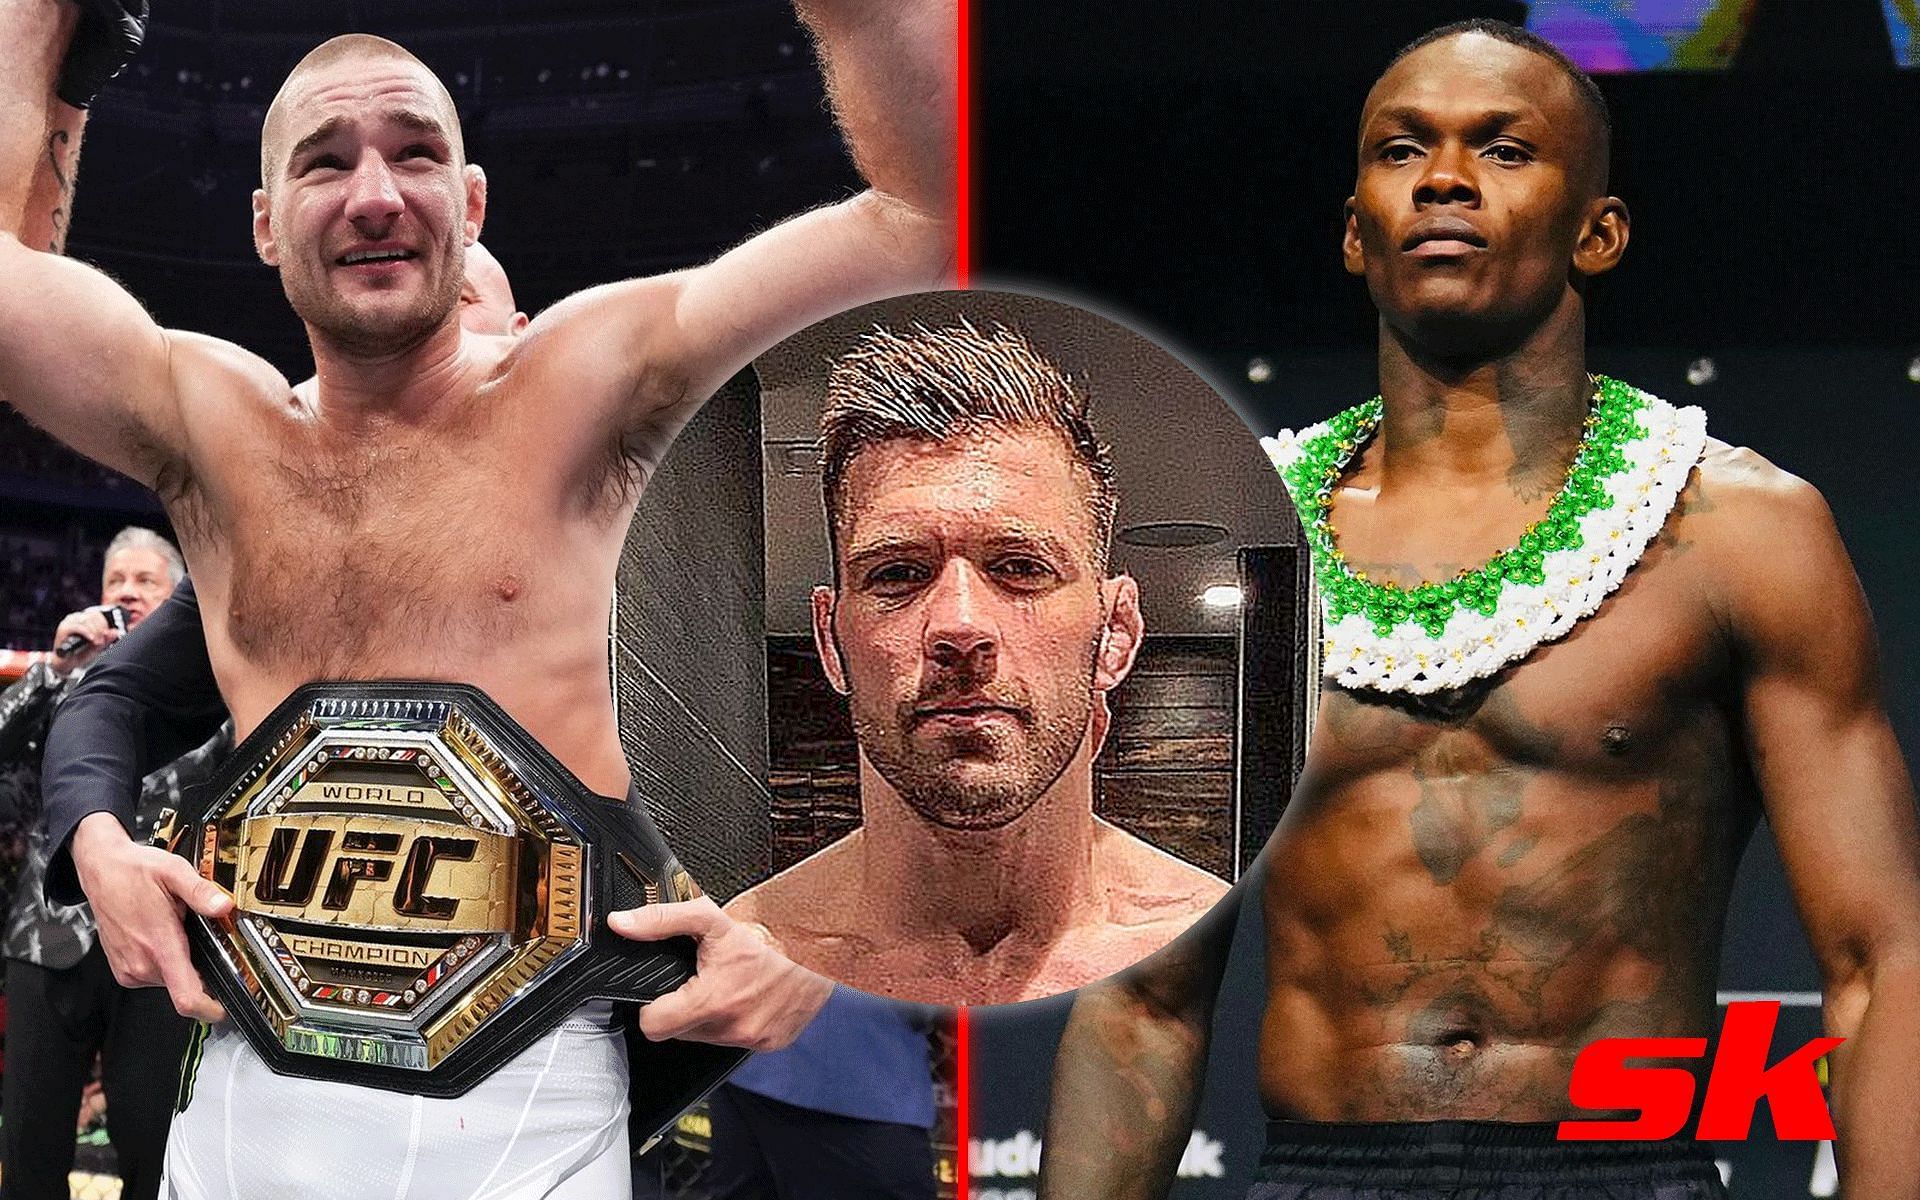 Dricus du Plessis (Inset) Sean Strickland (left) and Israel Adesanya (Right) [Images via: @ufc, @stylebender, and @dricusduplessis on Instagram]